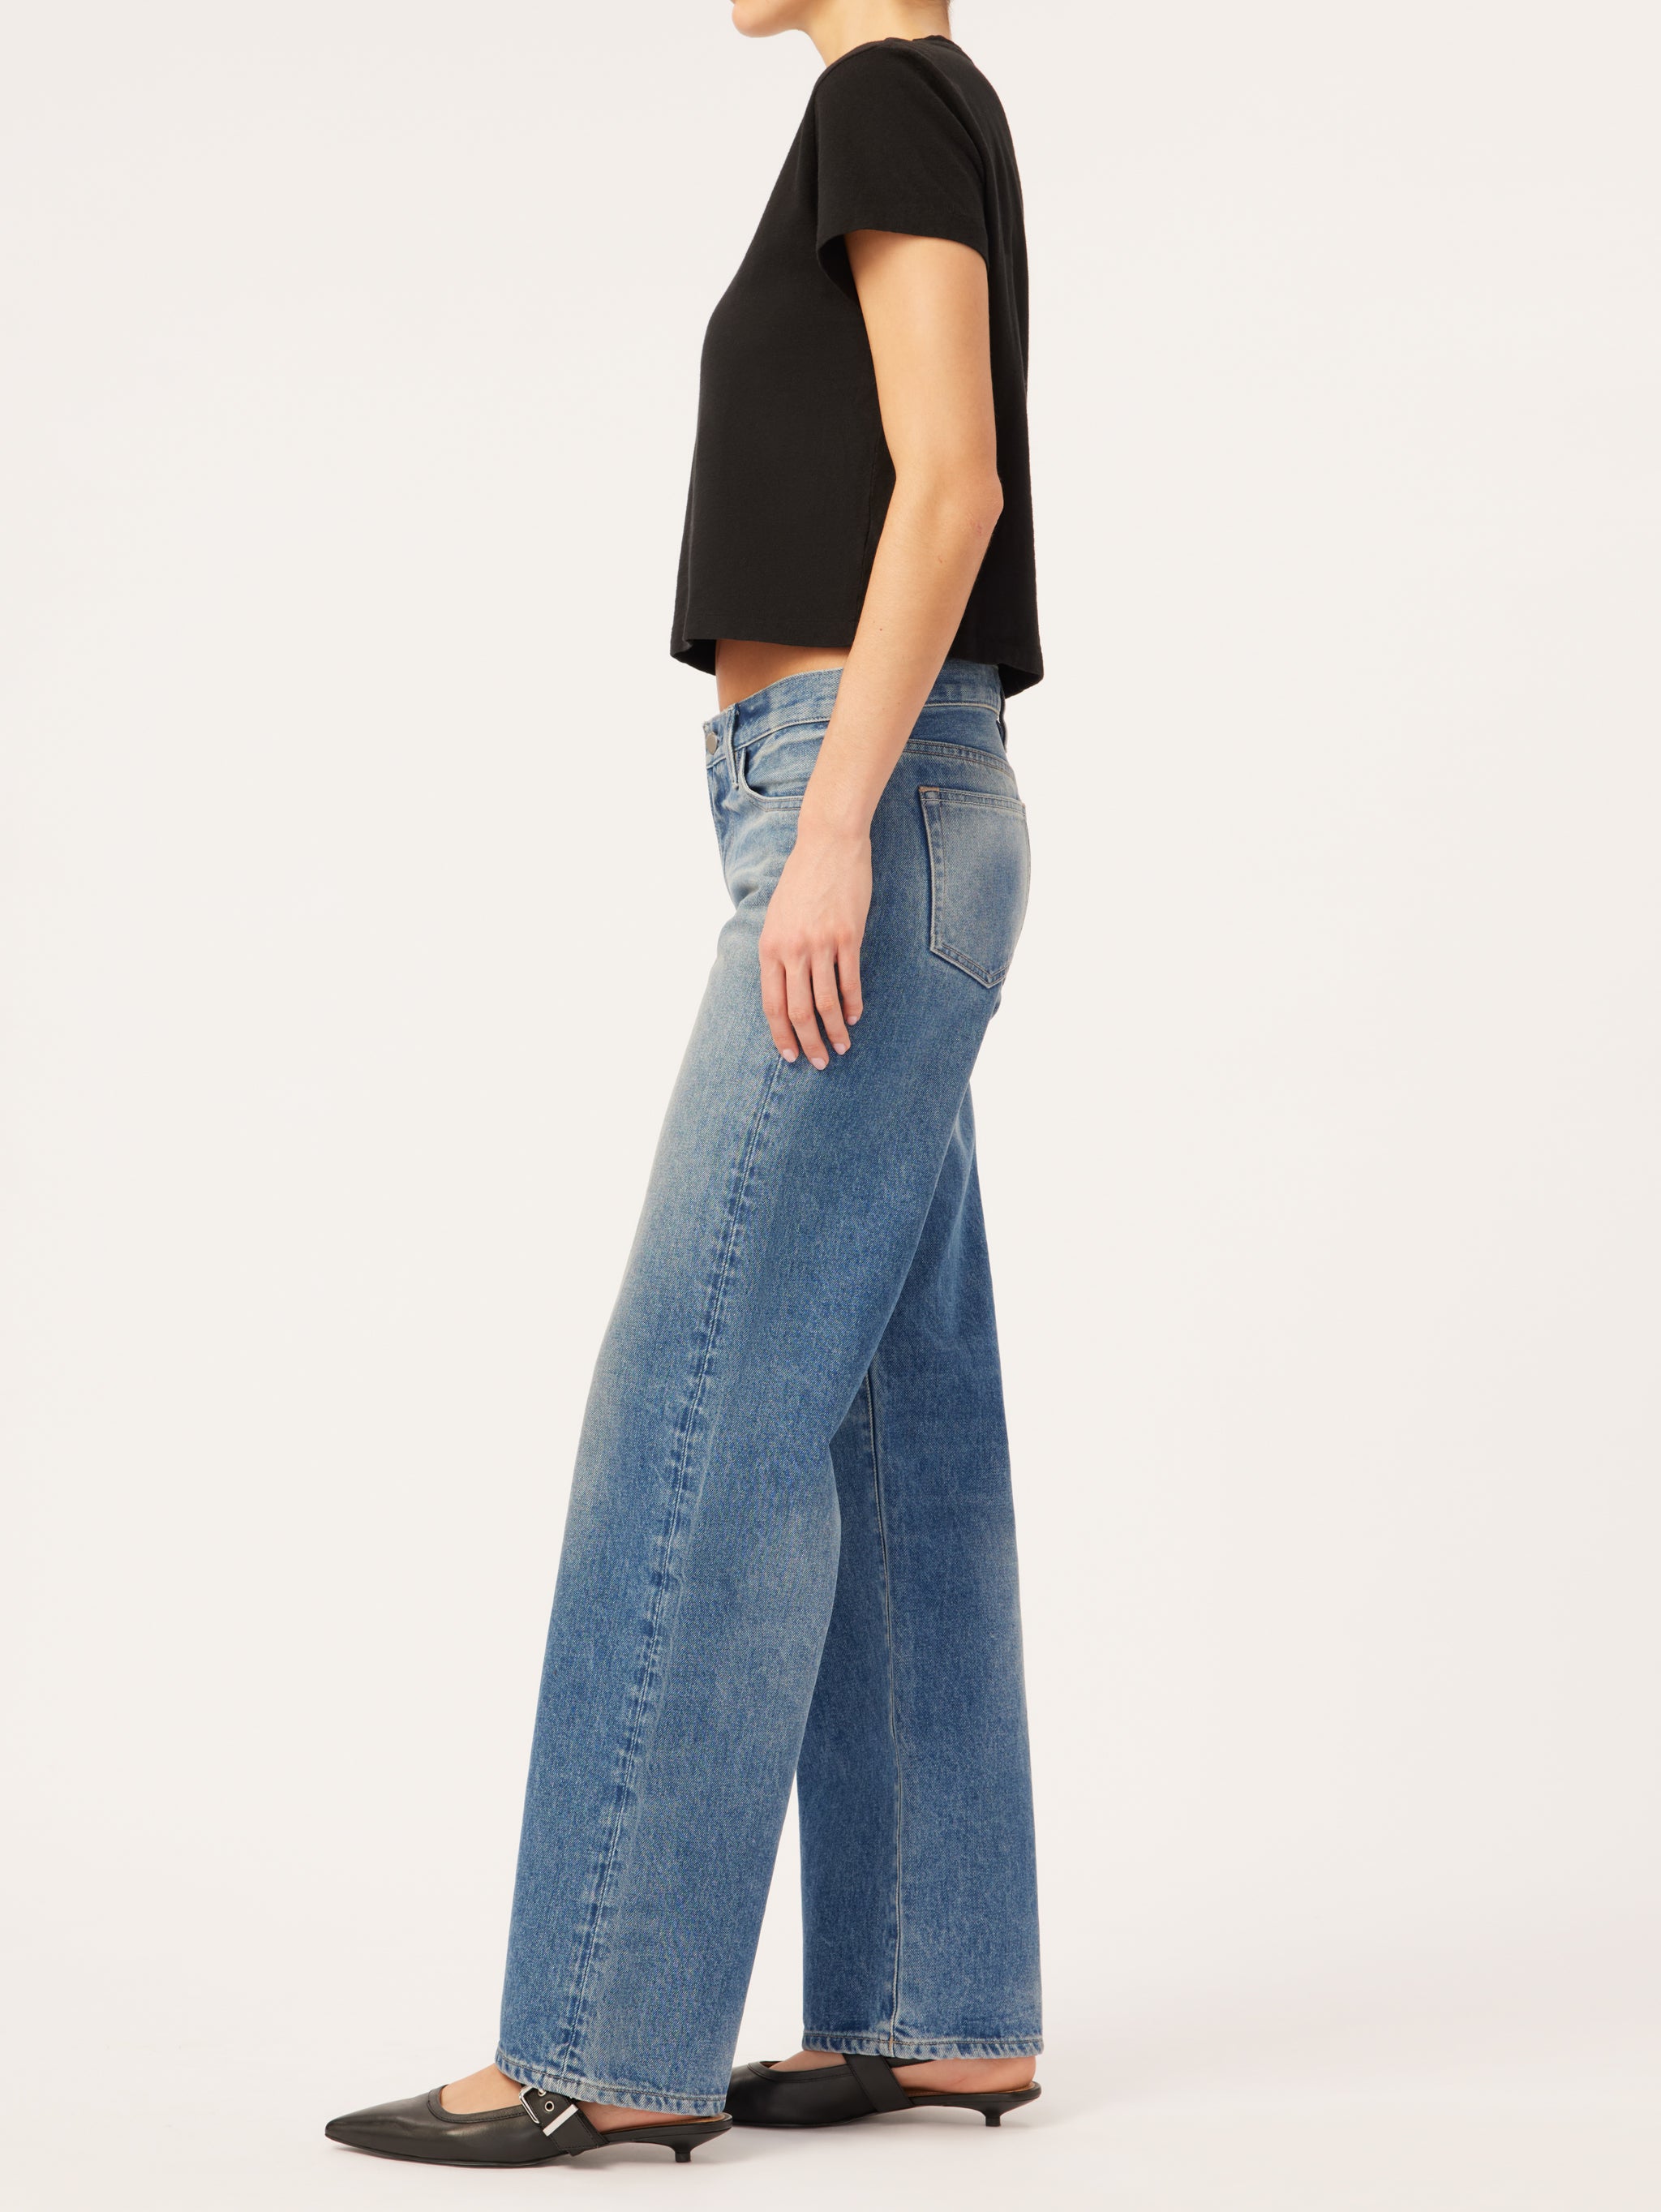 How to Style Wide Leg Pants - Jeans and a Teacup